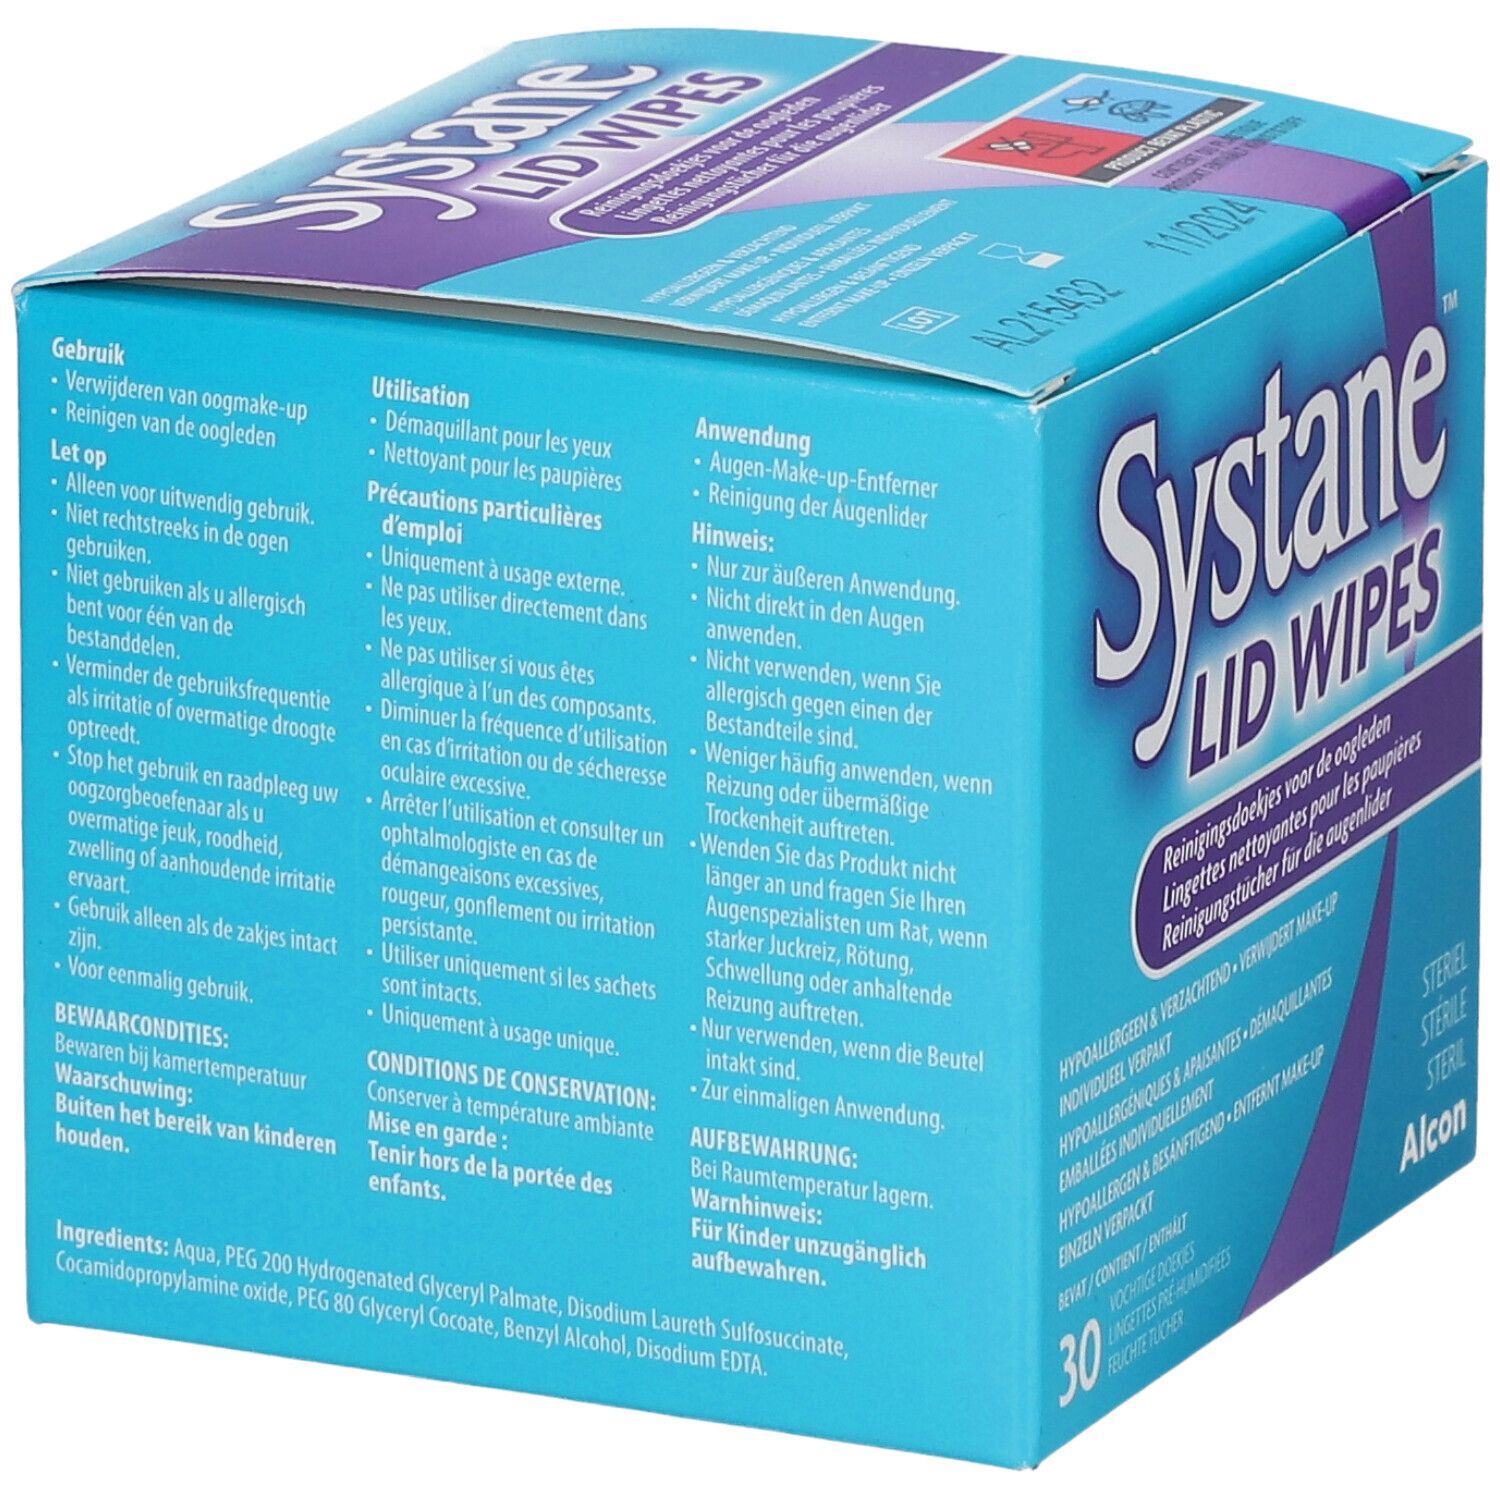 Systane® Lid Wipes Steril